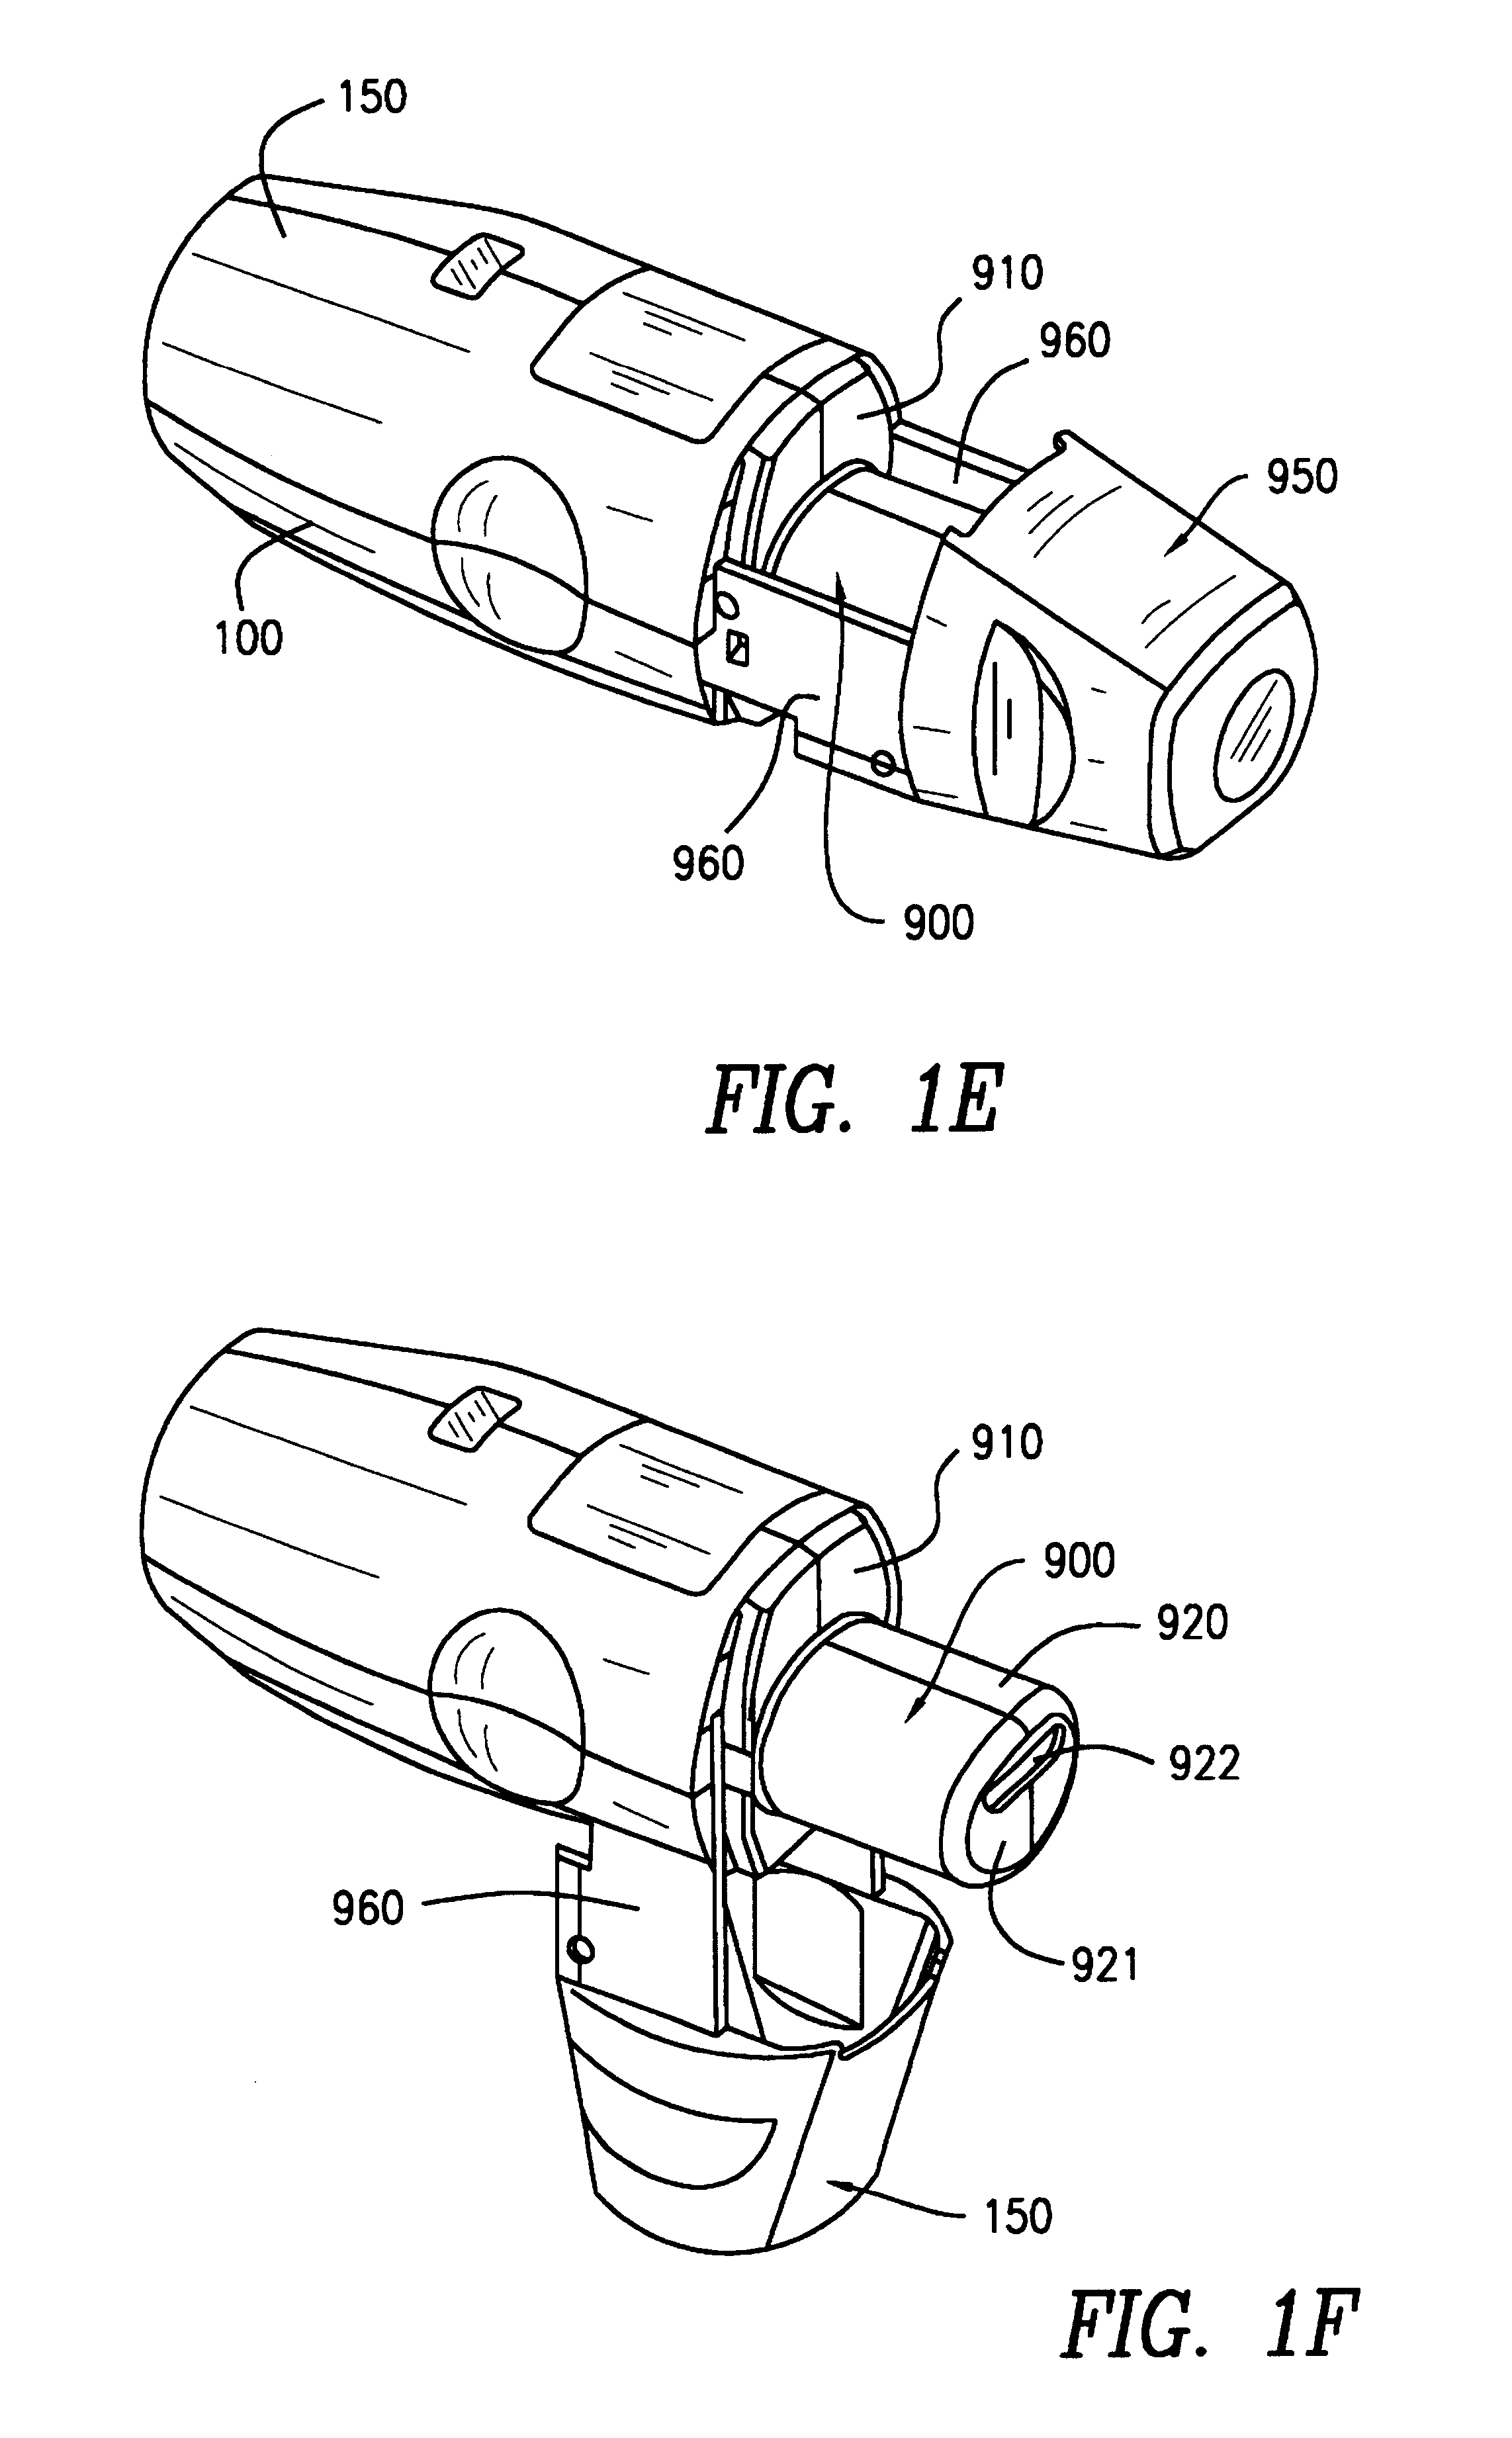 Inhaler for multiple dosed administration of a pharmacological dry powder